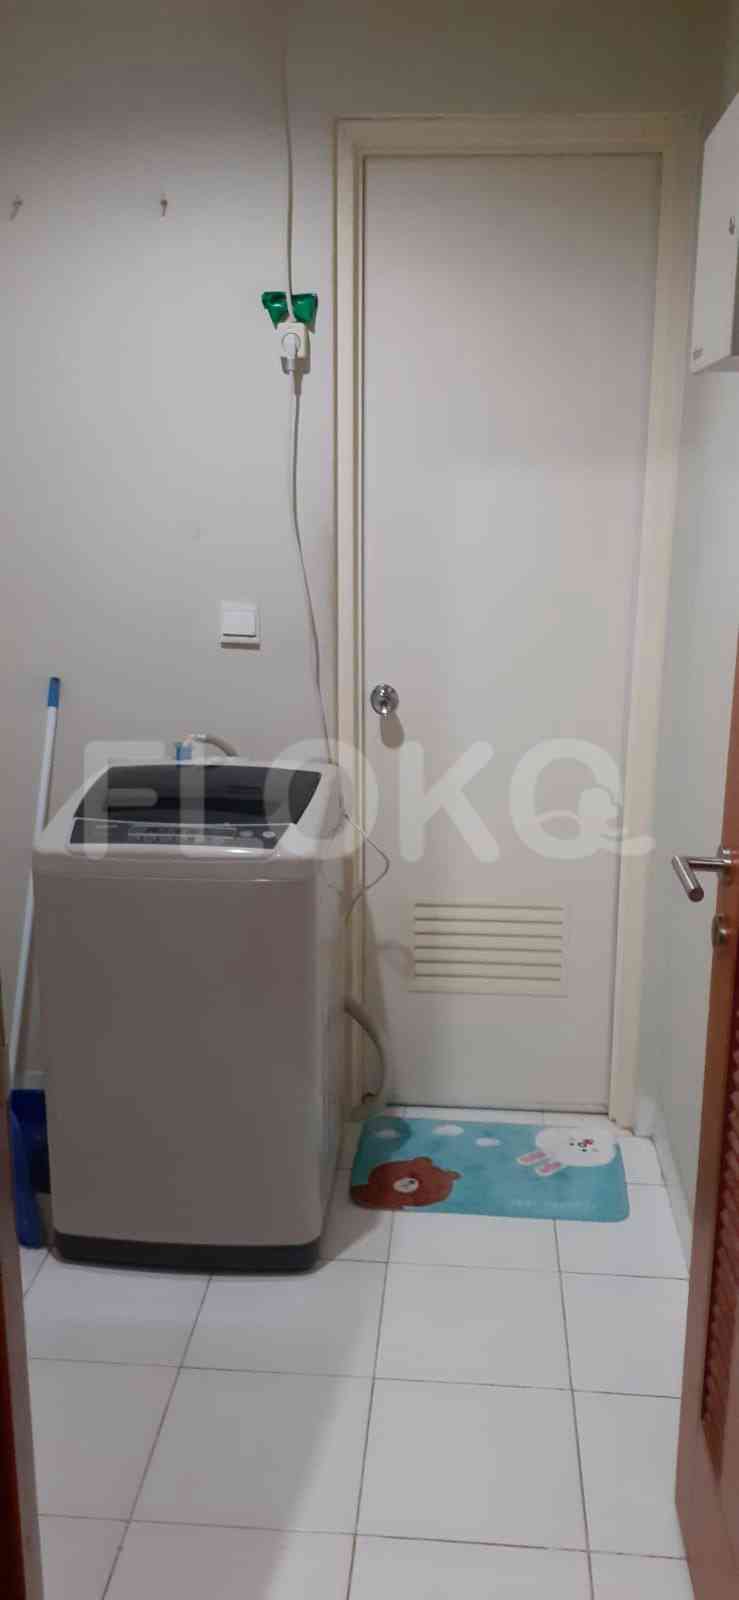 2 Bedroom on 11th Floor for Rent in Kuningan Place Apartment - fku092 4